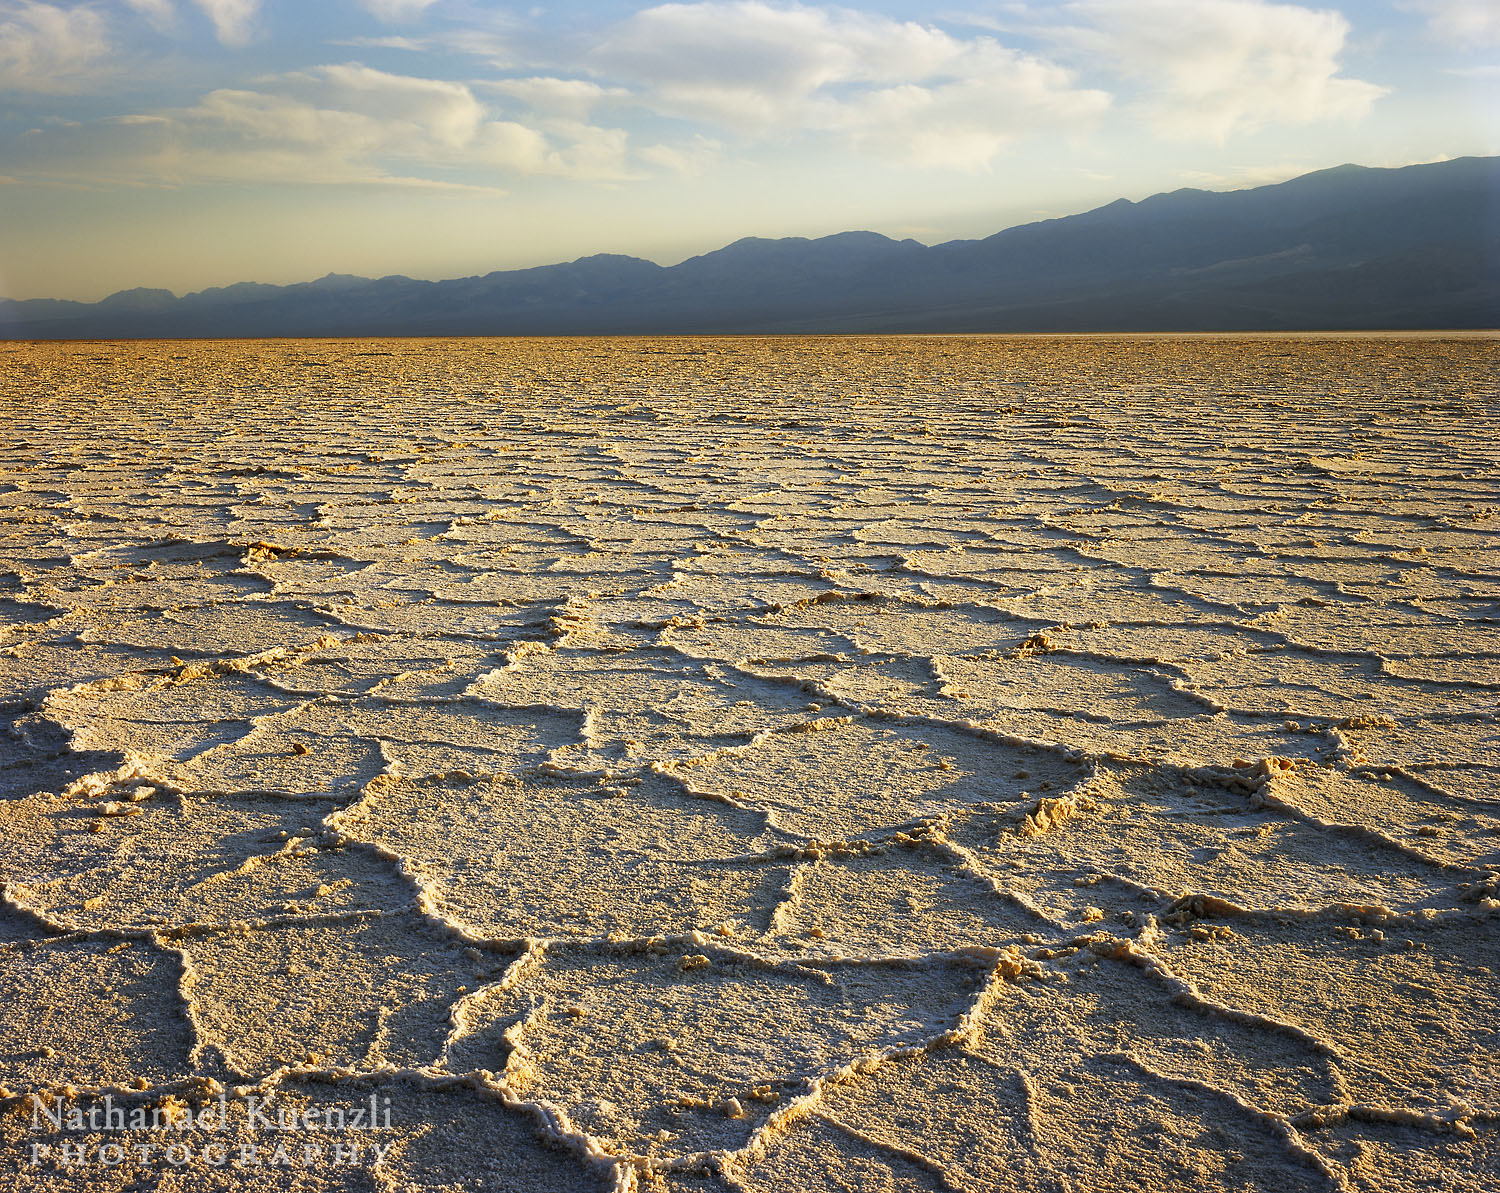   Badwater Basin and Panamint Range, Death Valley National Park, California, April 2008  